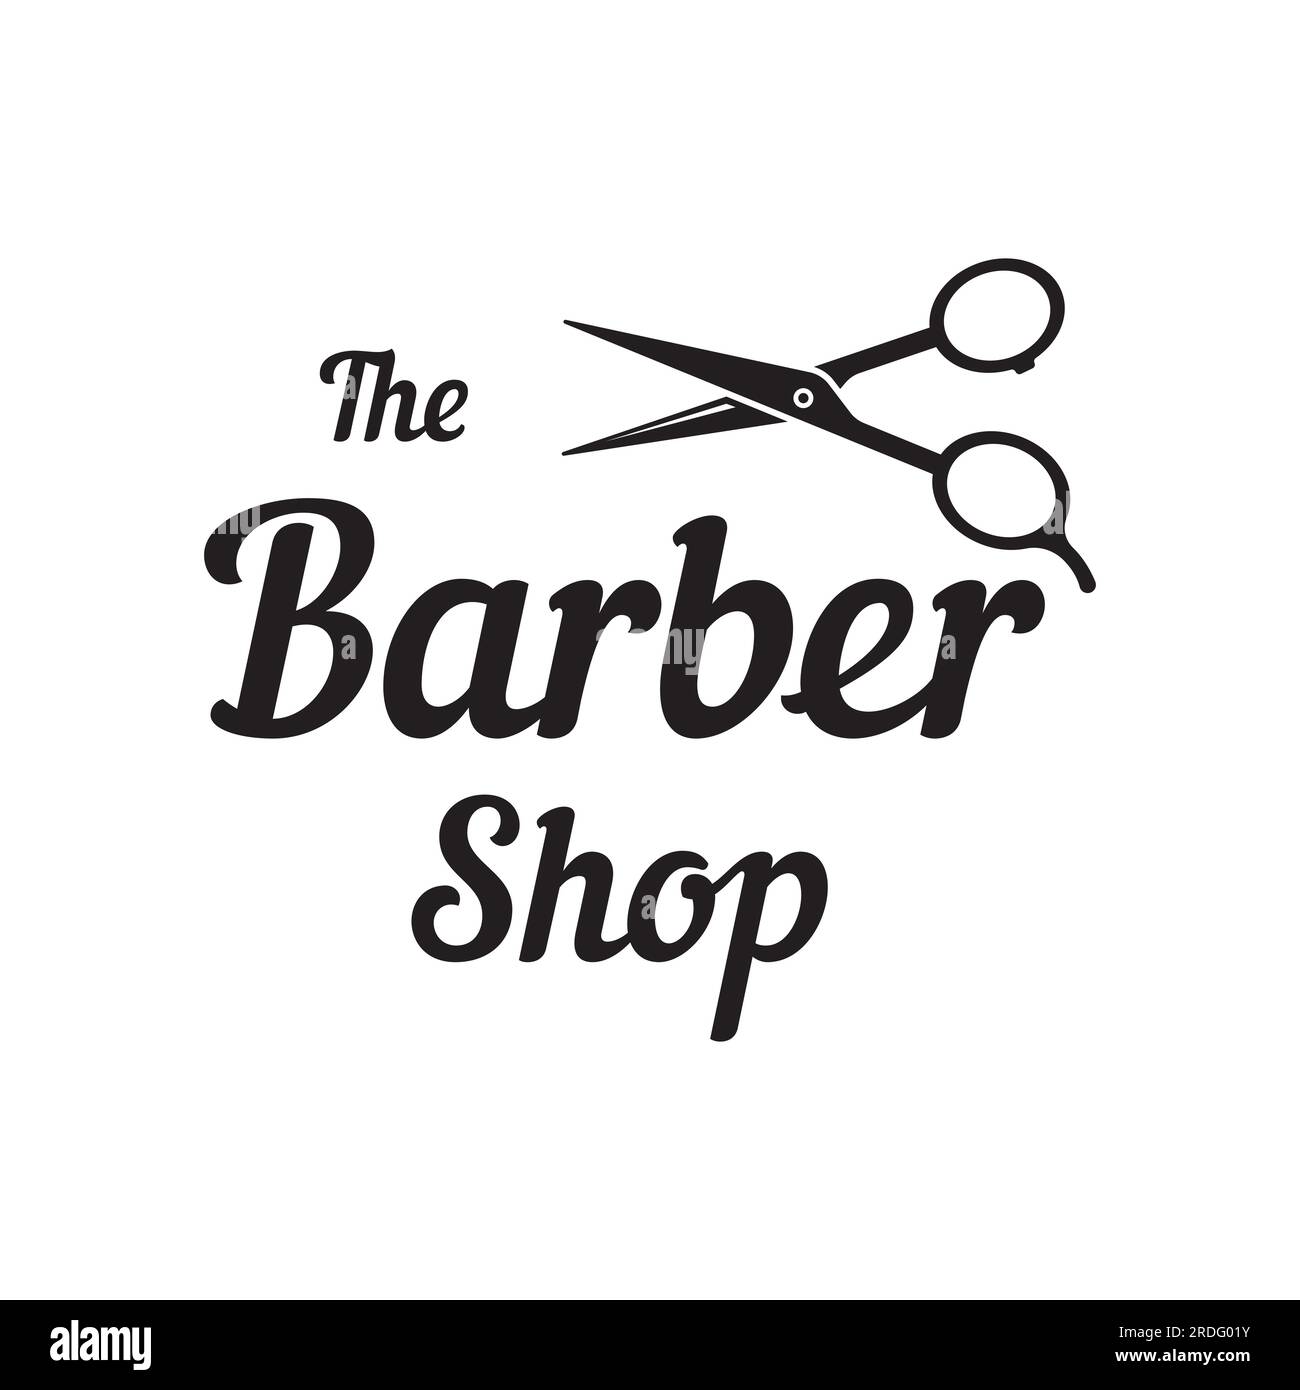 Barbershop and store Cut Out Stock Images & Pictures - Page 2 - Alamy